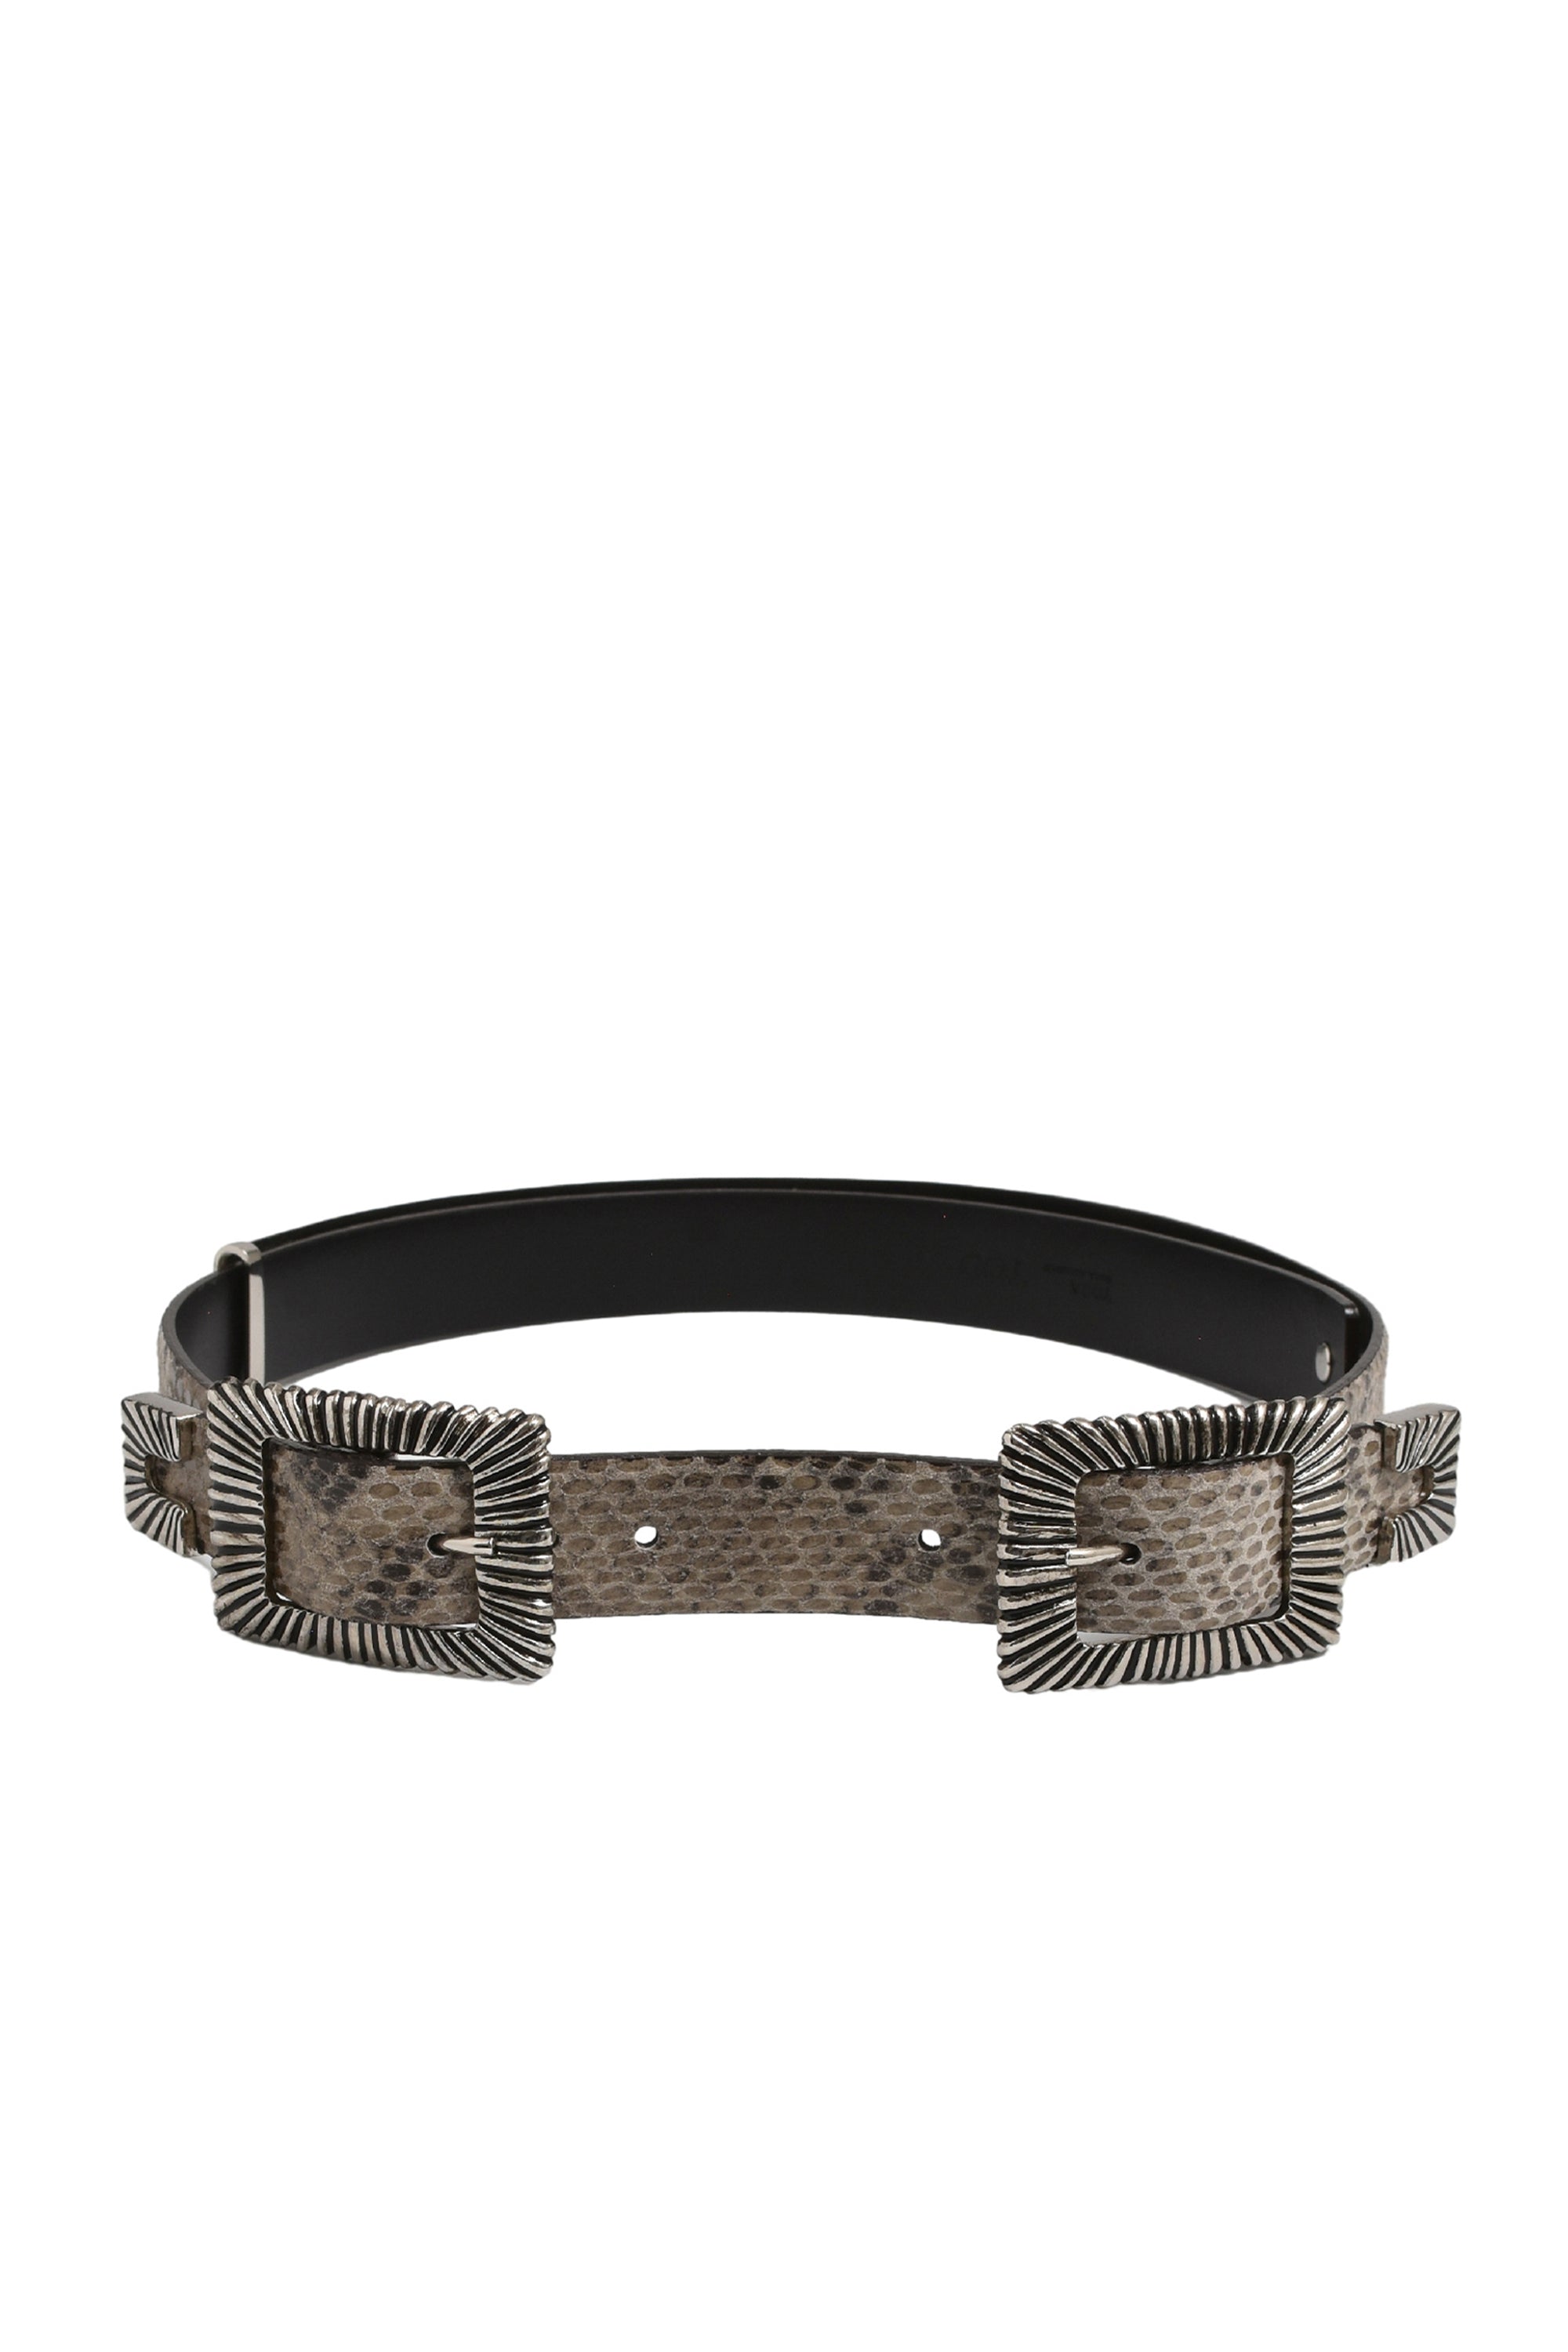 TOGA トーガ SS24 DOUBLE SQUARE BUCKLE BELT / SNAKE - NUBIAN